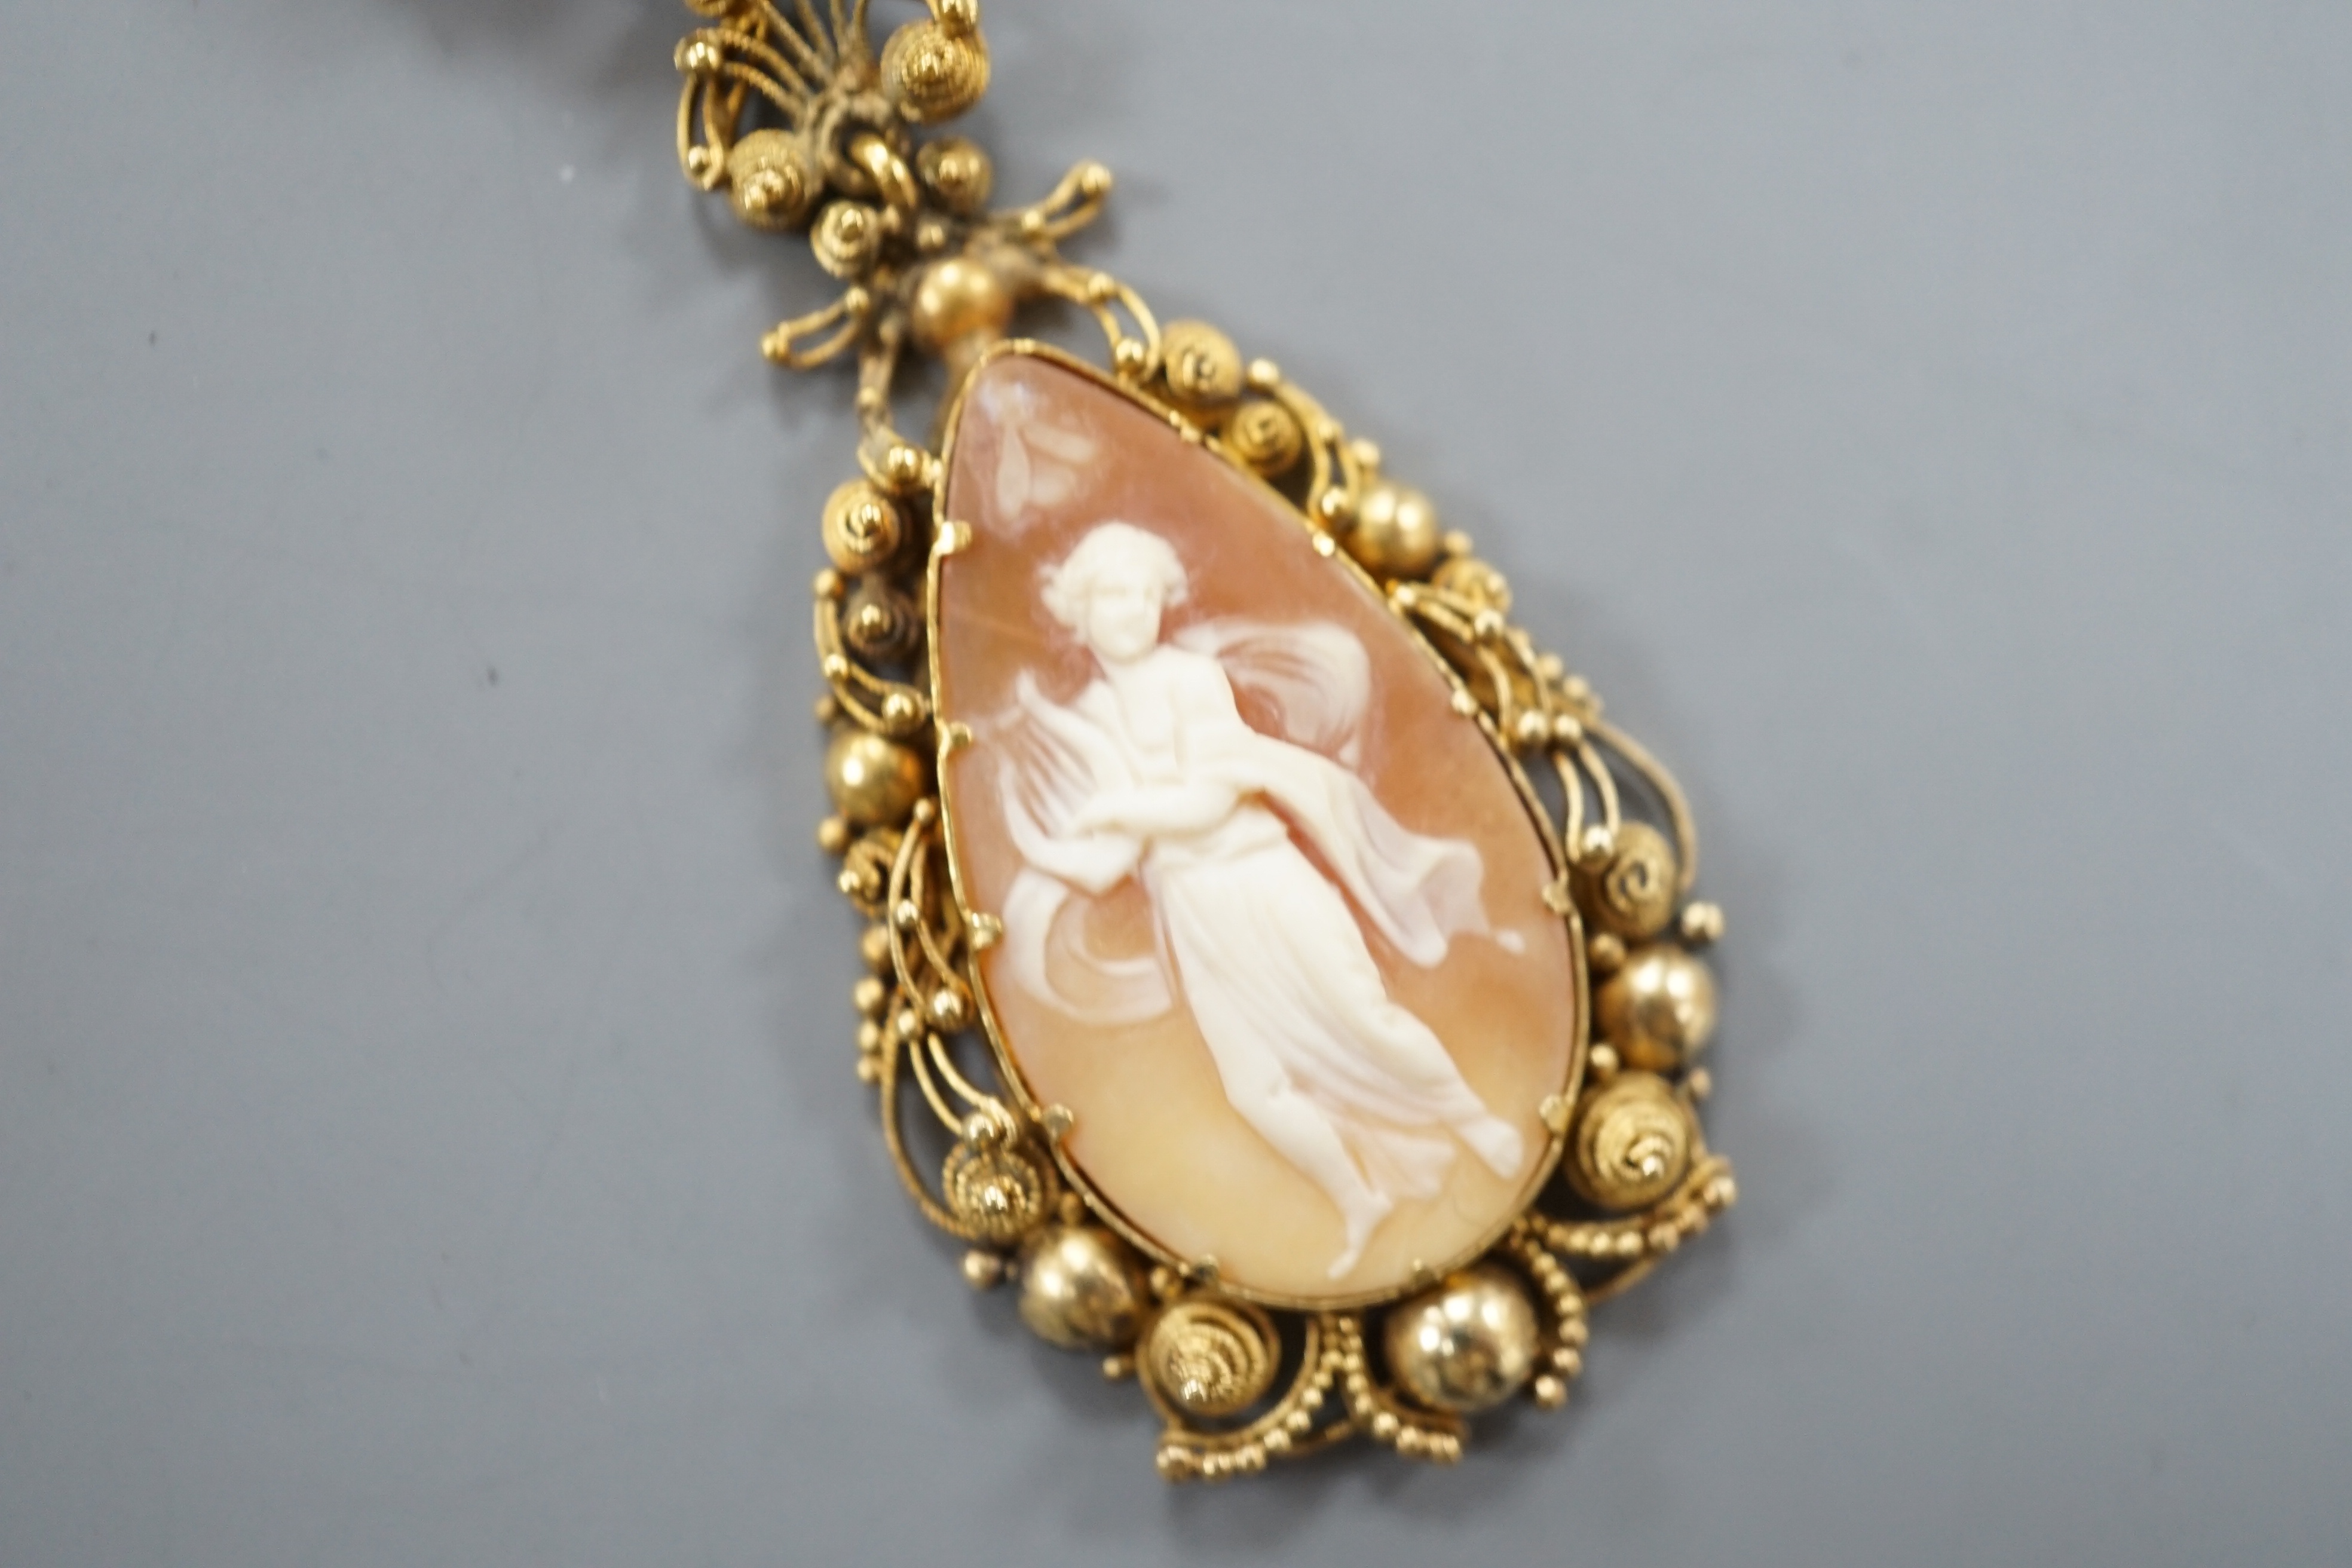 A 9ct and cameo shell set drop pendant necklace, 70cm, gross weight 10.9 grams.